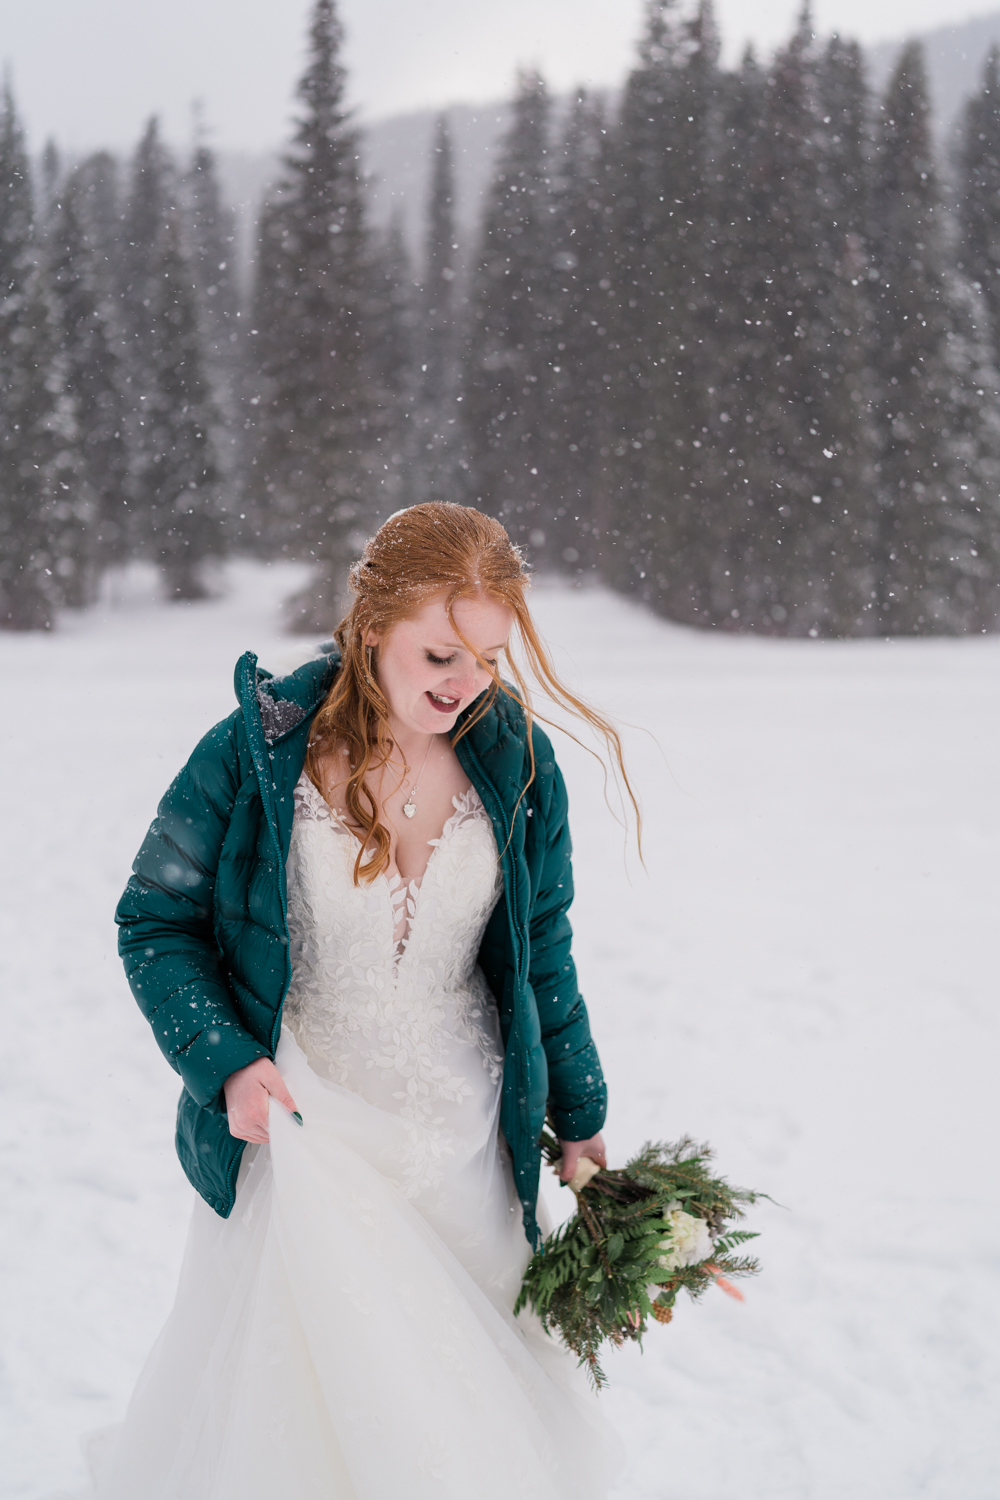 A red headed bride in a green puffy jacket walks looking down while holding bouquet in a snowstorm during Emerald Lake elopement